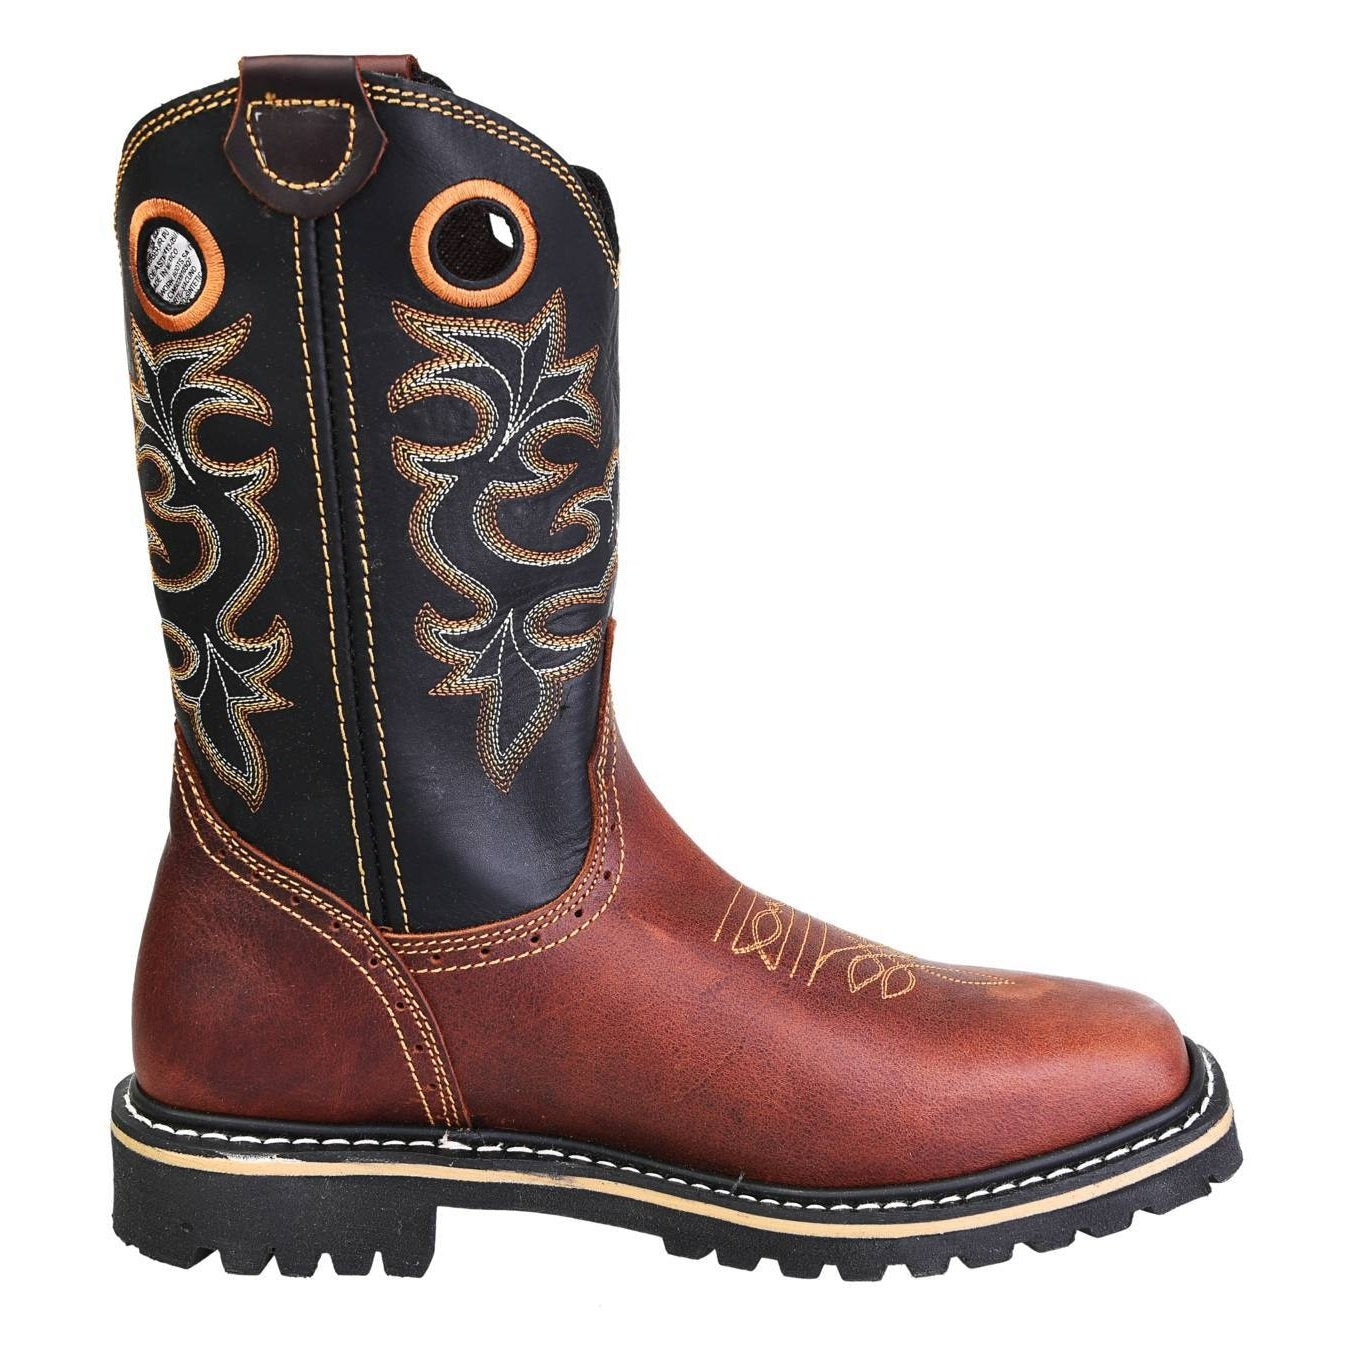 Men's Work Boots - Steel Toe - Shedron Work Boots - Pradera - Pull On Work Boots - Shedron Wellington Work Boots